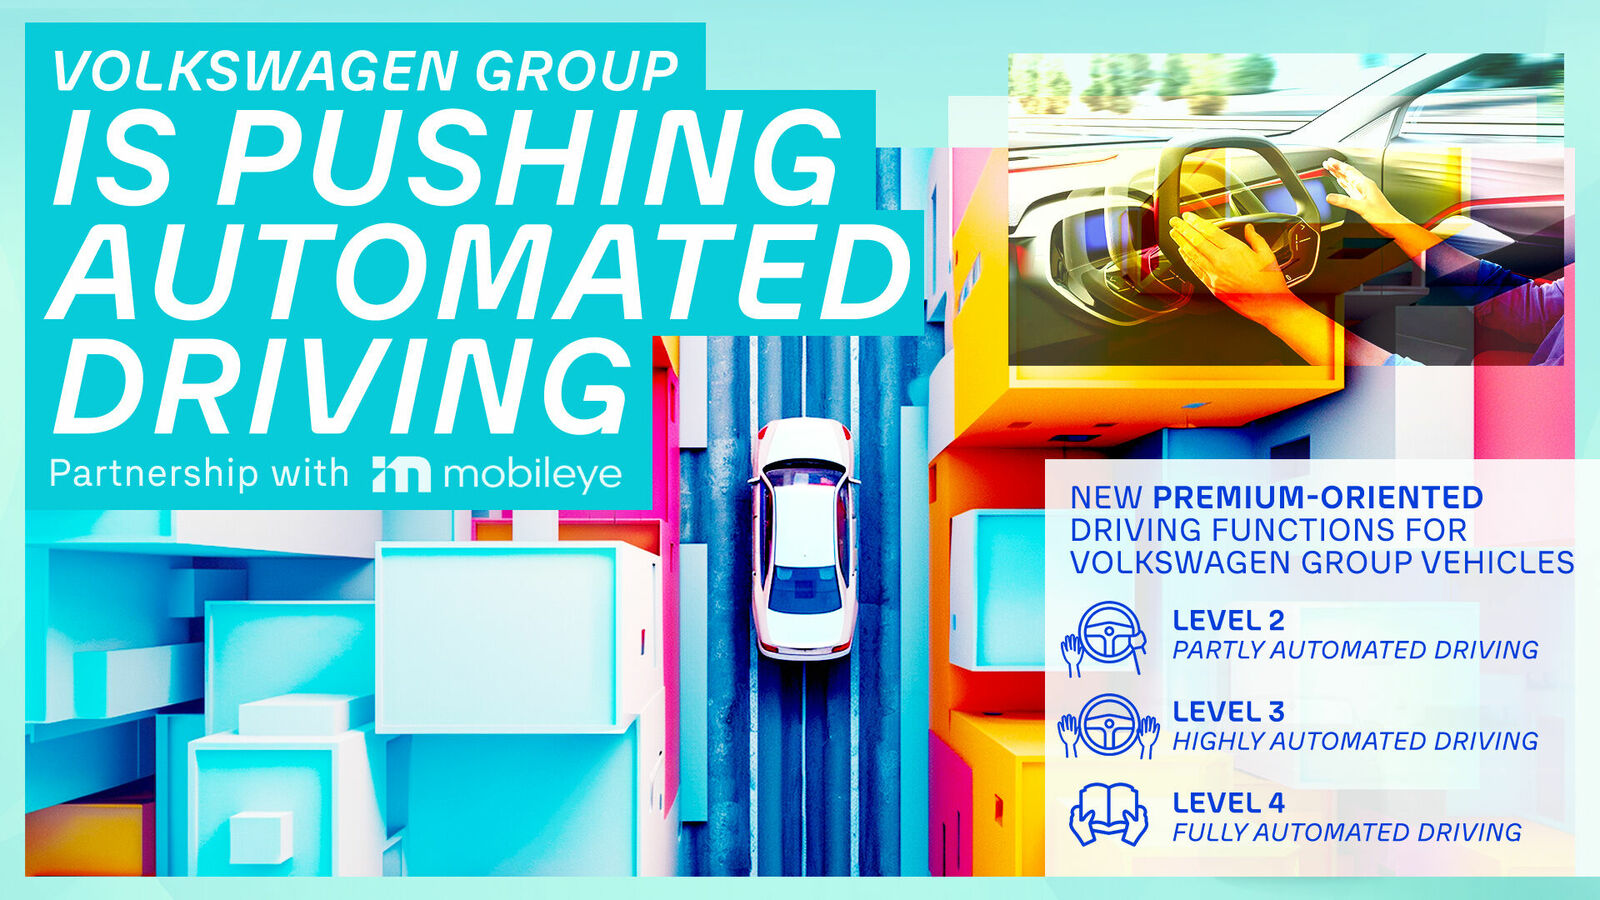 Promotional banner for Volkswagen focusing on automated driving and partnership with Mobileye.